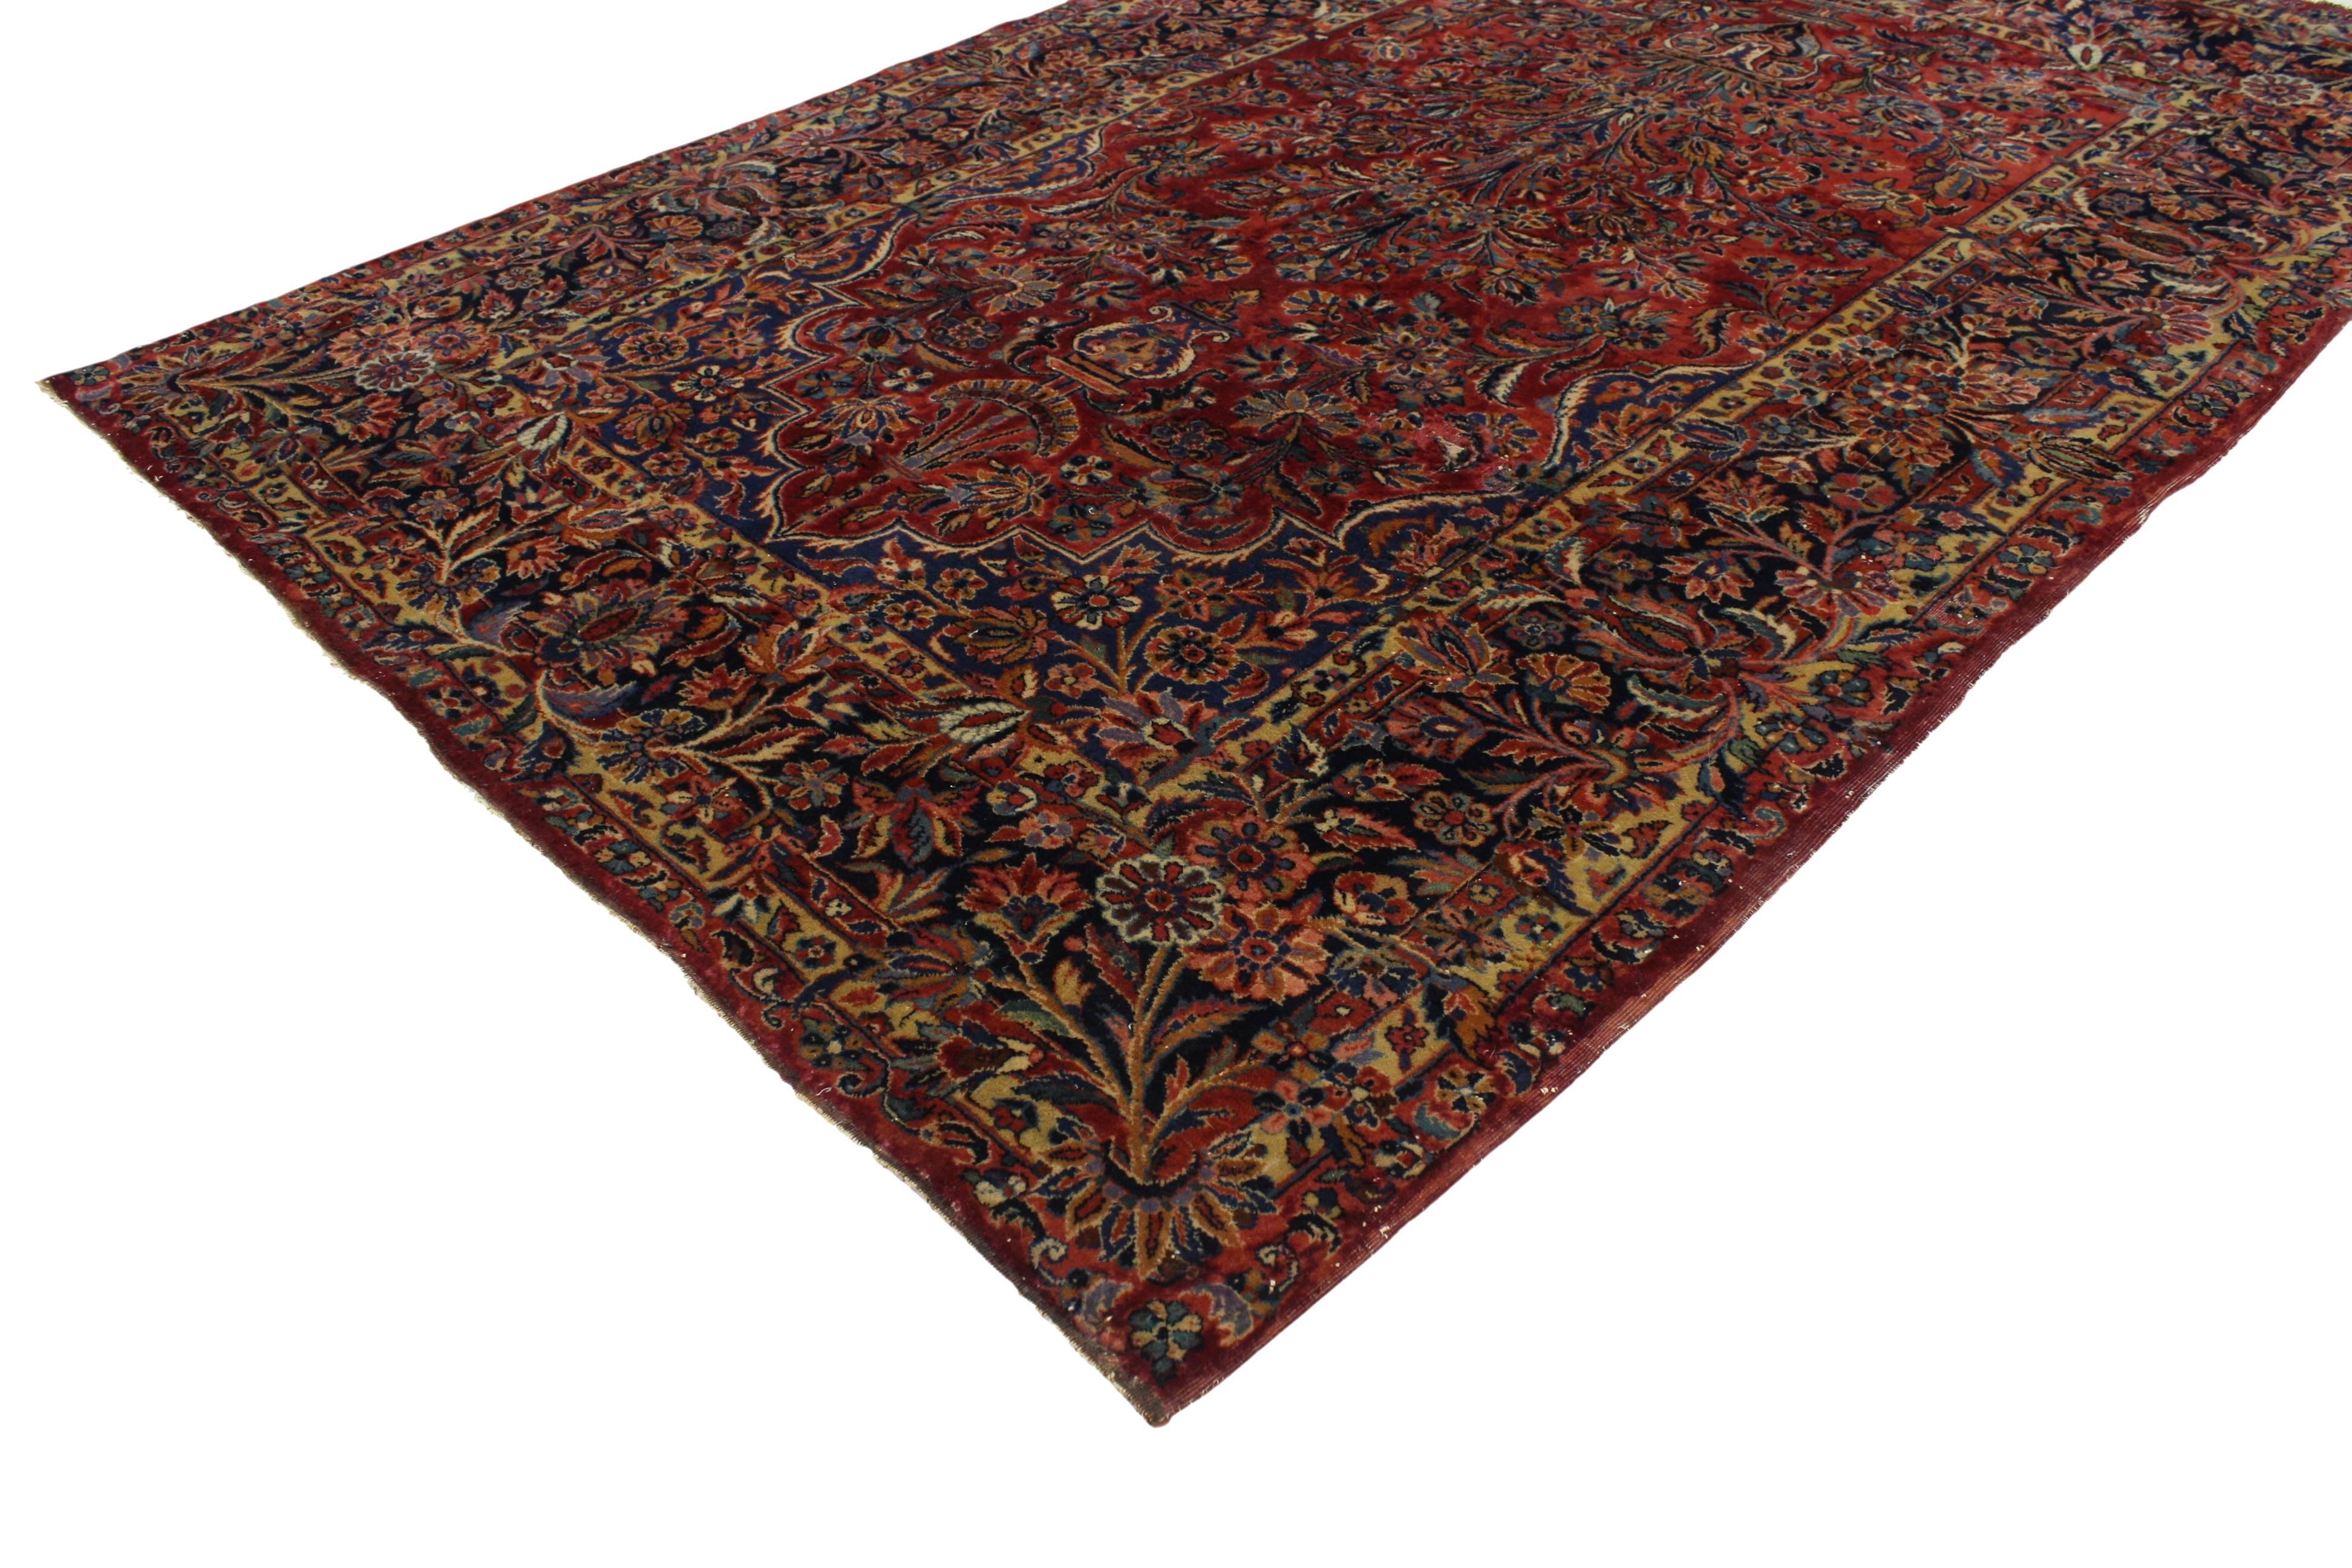 76886 Antique Persian Kashan Vase Rug with Traditional Style 04'04 x 06'05. Vibrant colors with beguiling ambiance, this hand knotted wool antique Persian Kashan vase rug is poised to impress. The abrashed red field features an all-over botanical